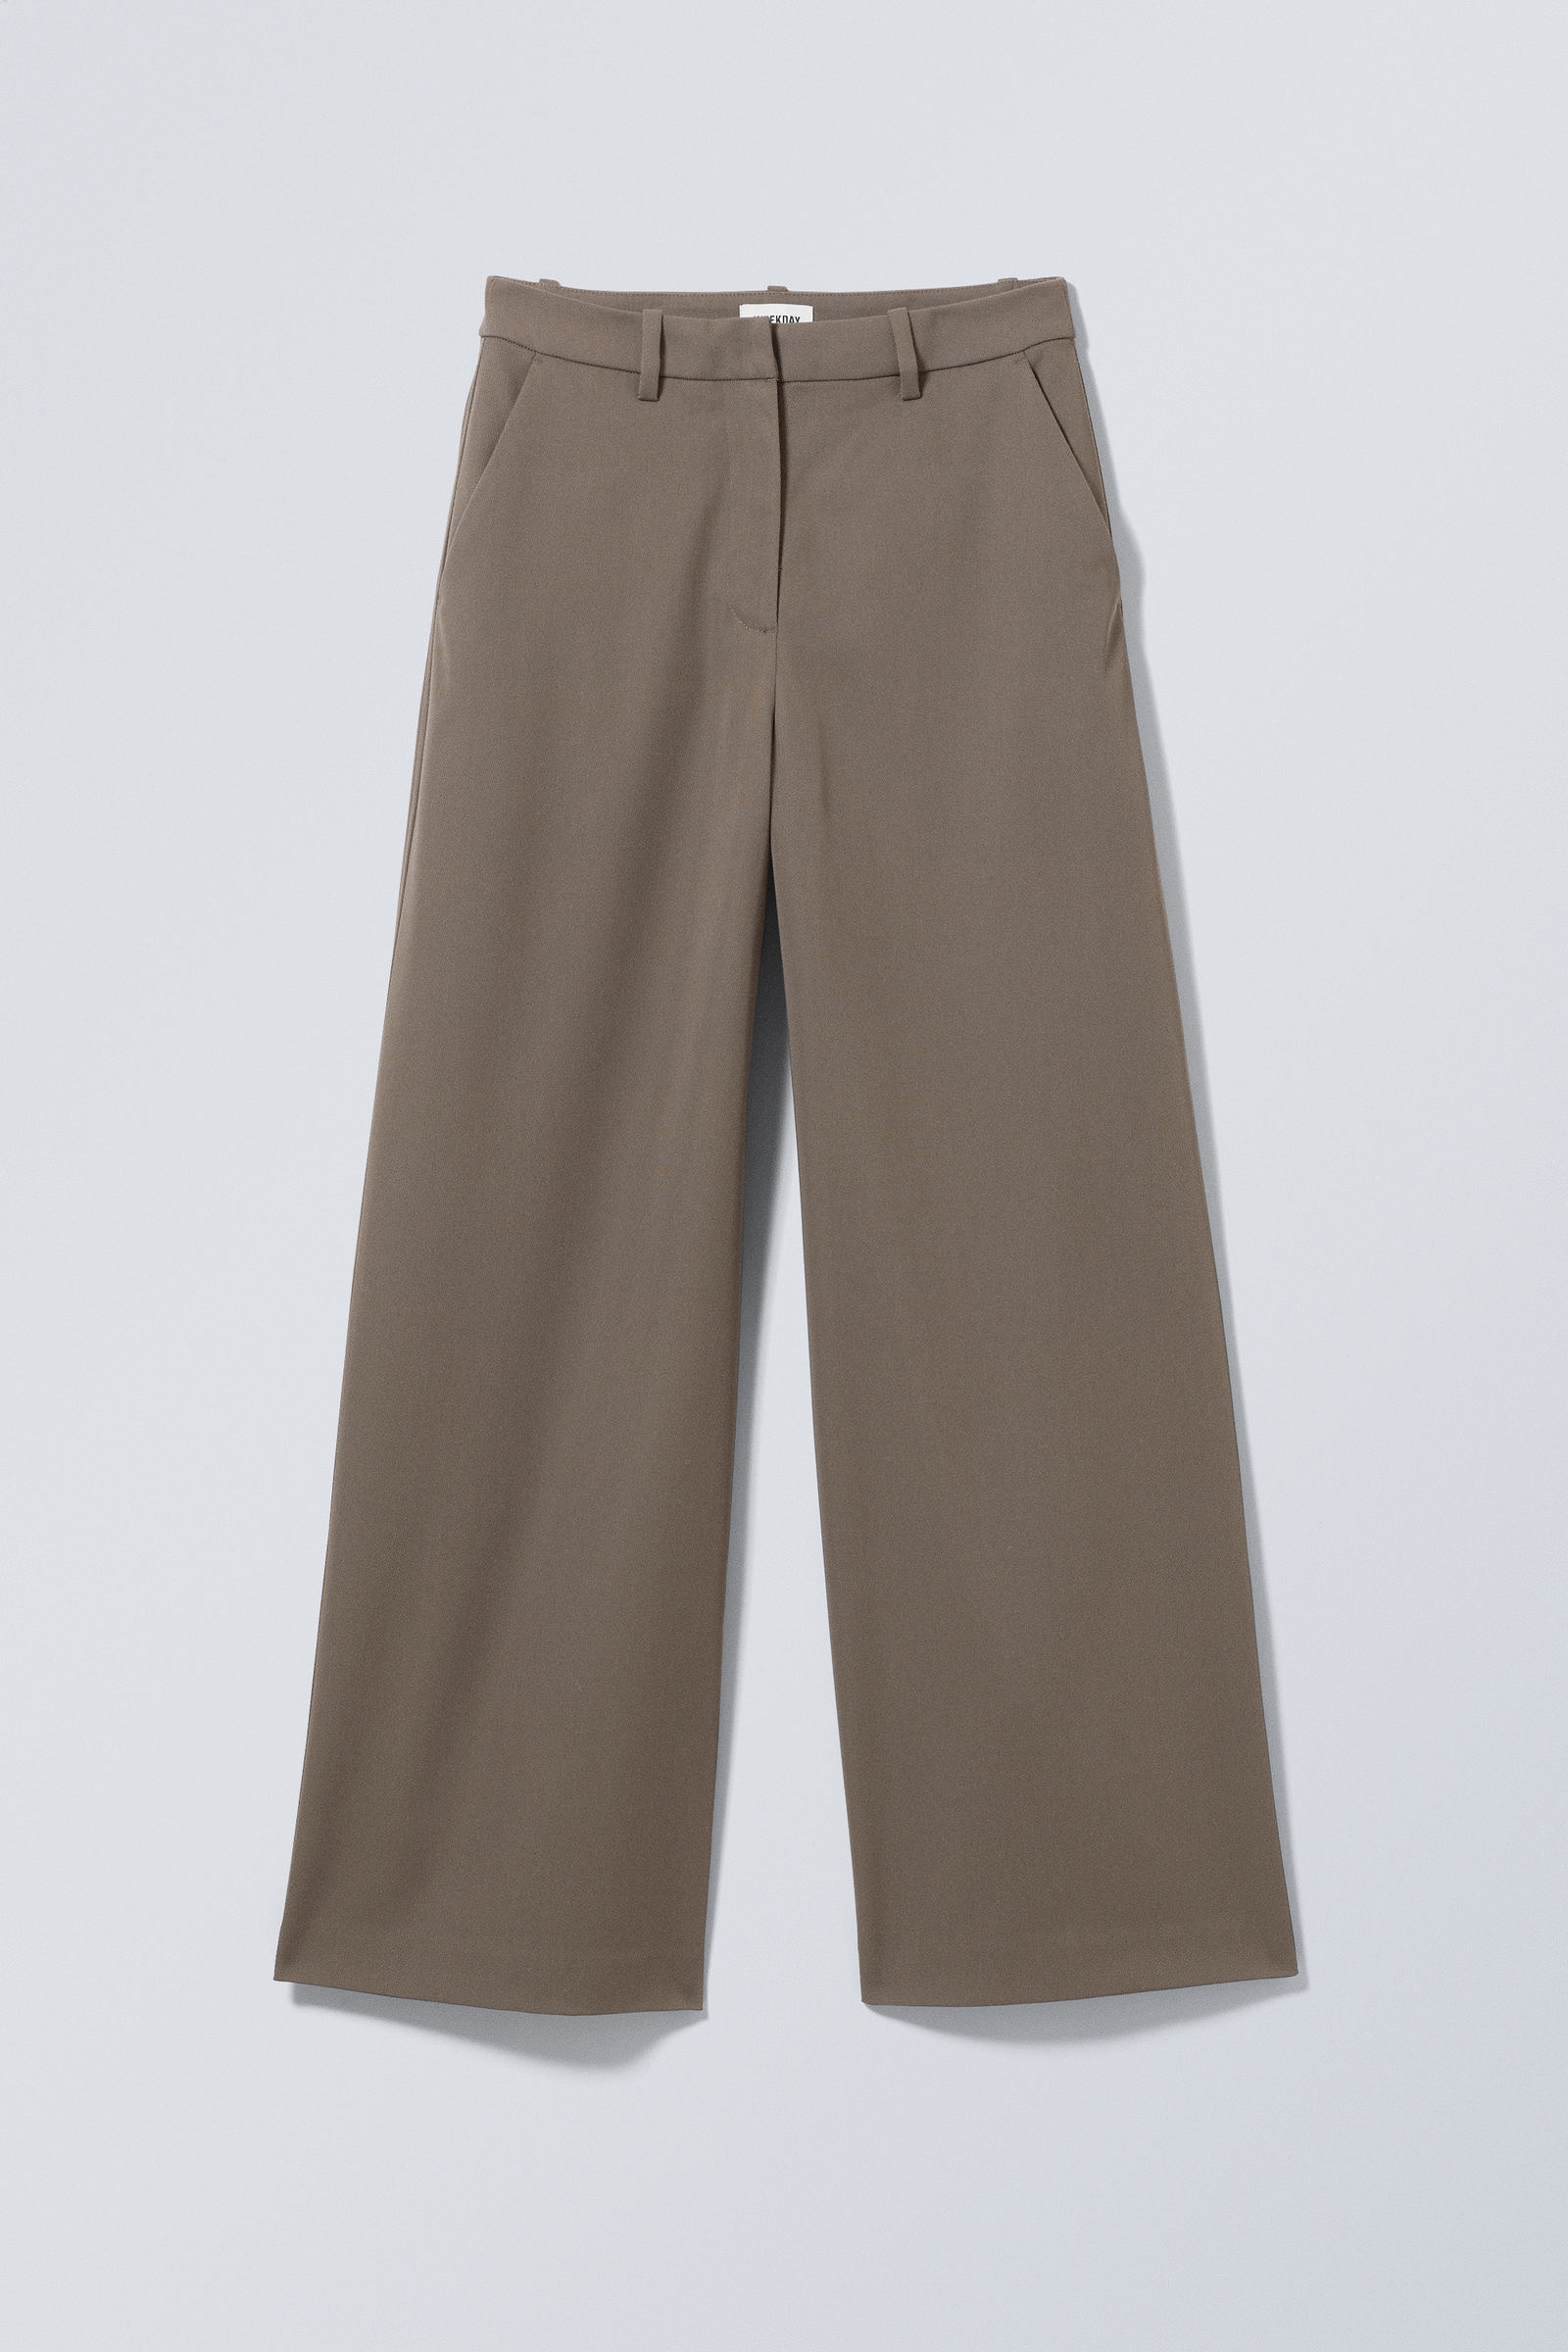 #5B5A54 - Tate Suiting Trousers - 1